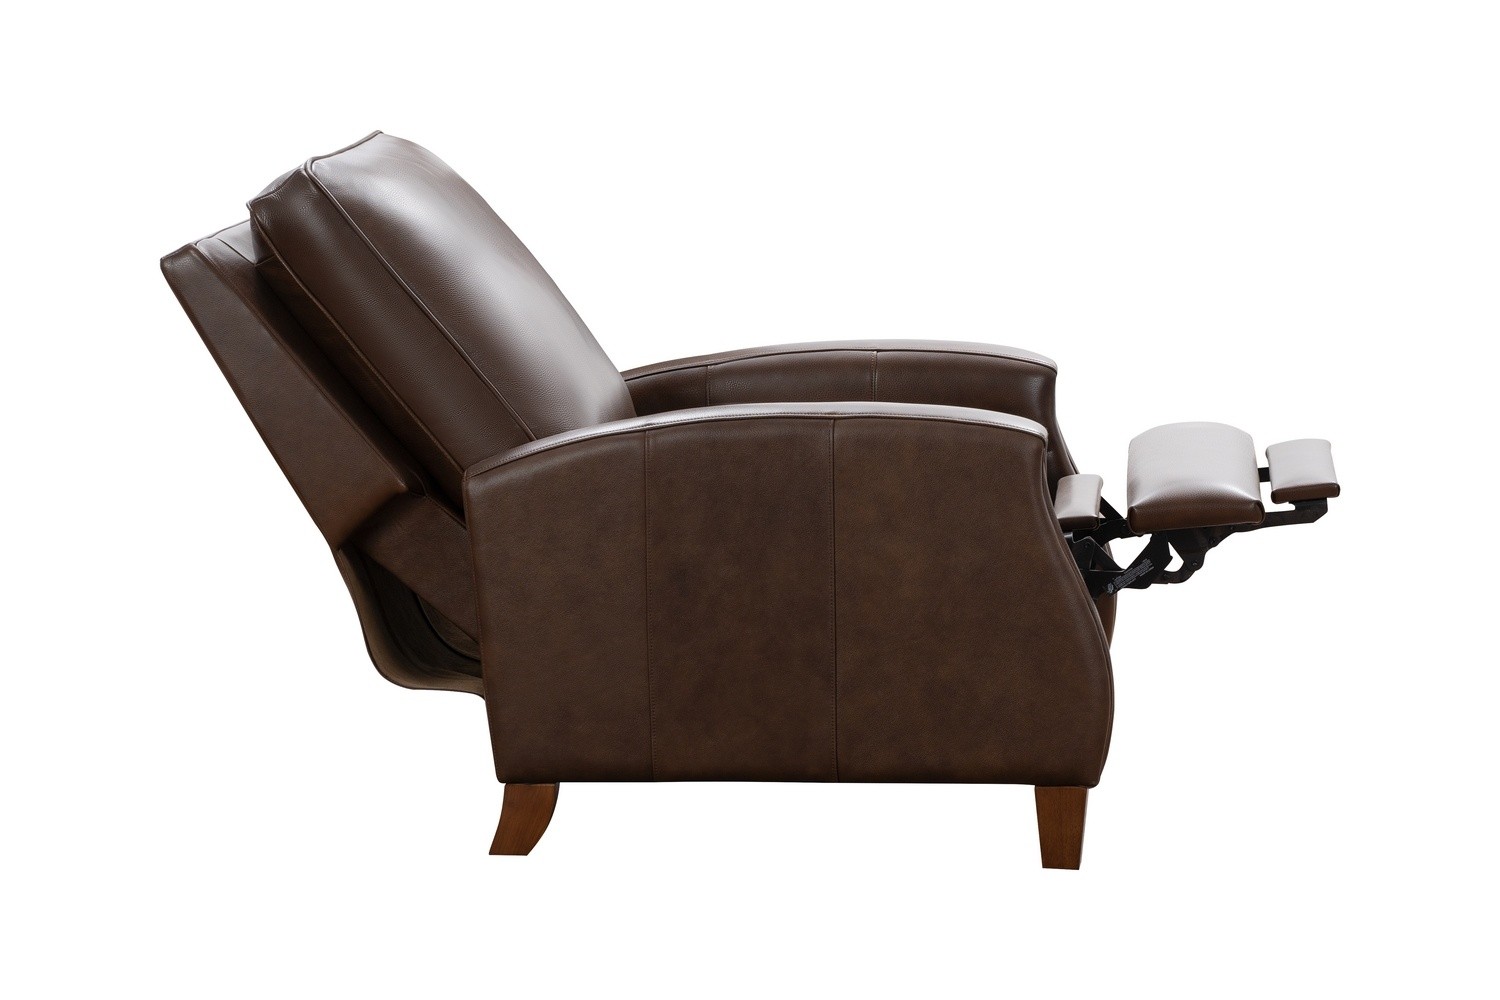 Barcalounger Penrose Recliner Chair - Wenlock Double Chocolate/All Leather